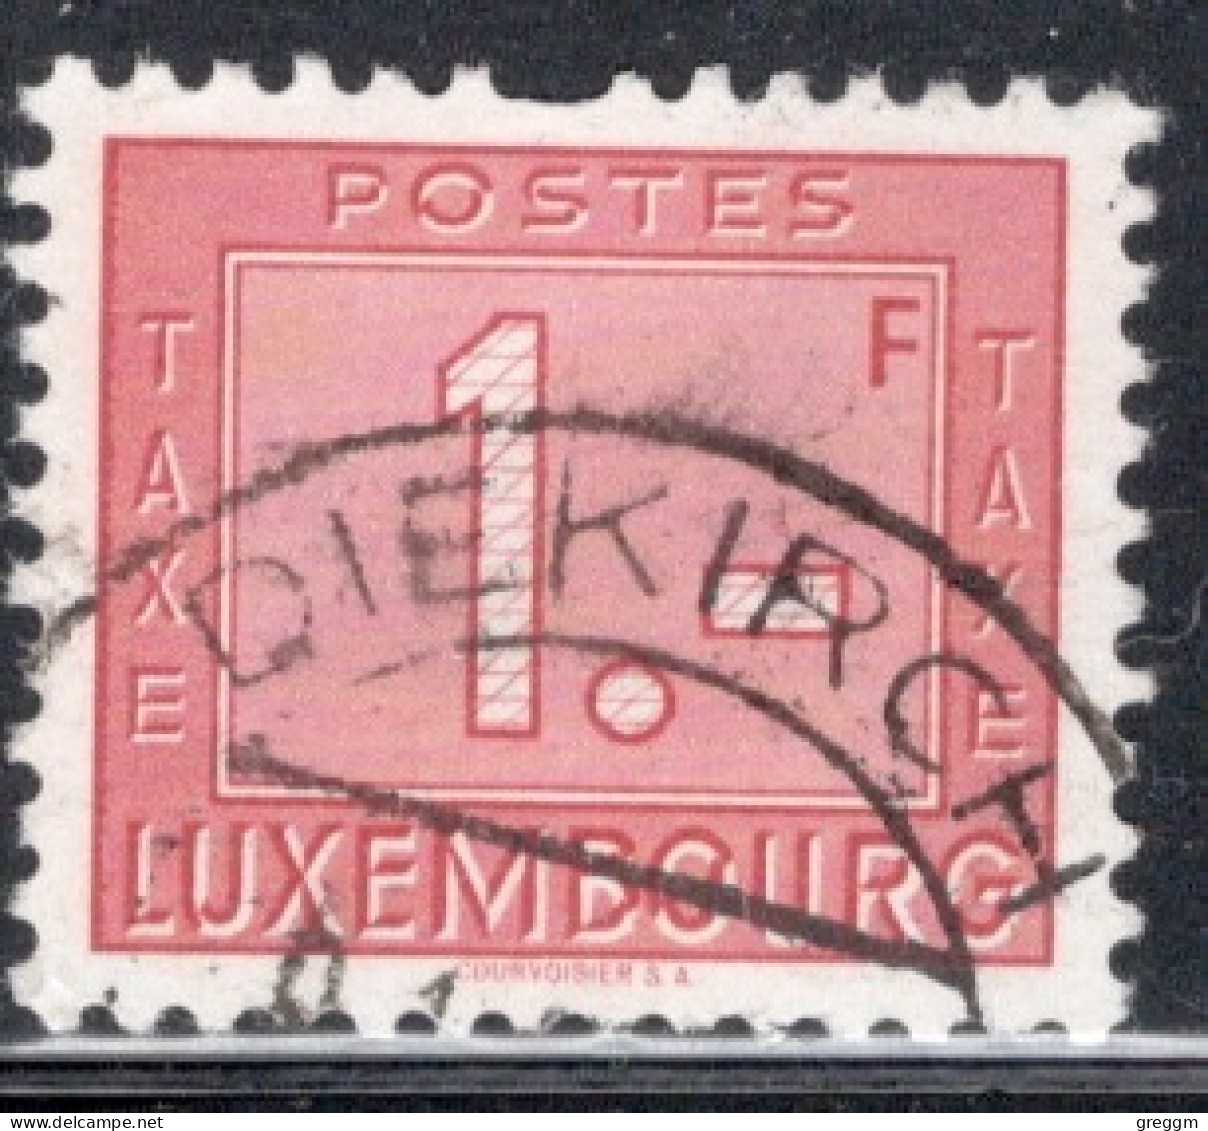 Luxembourg 1946 Single Numeral Stamps - New Design  In Fine Used - Impuestos